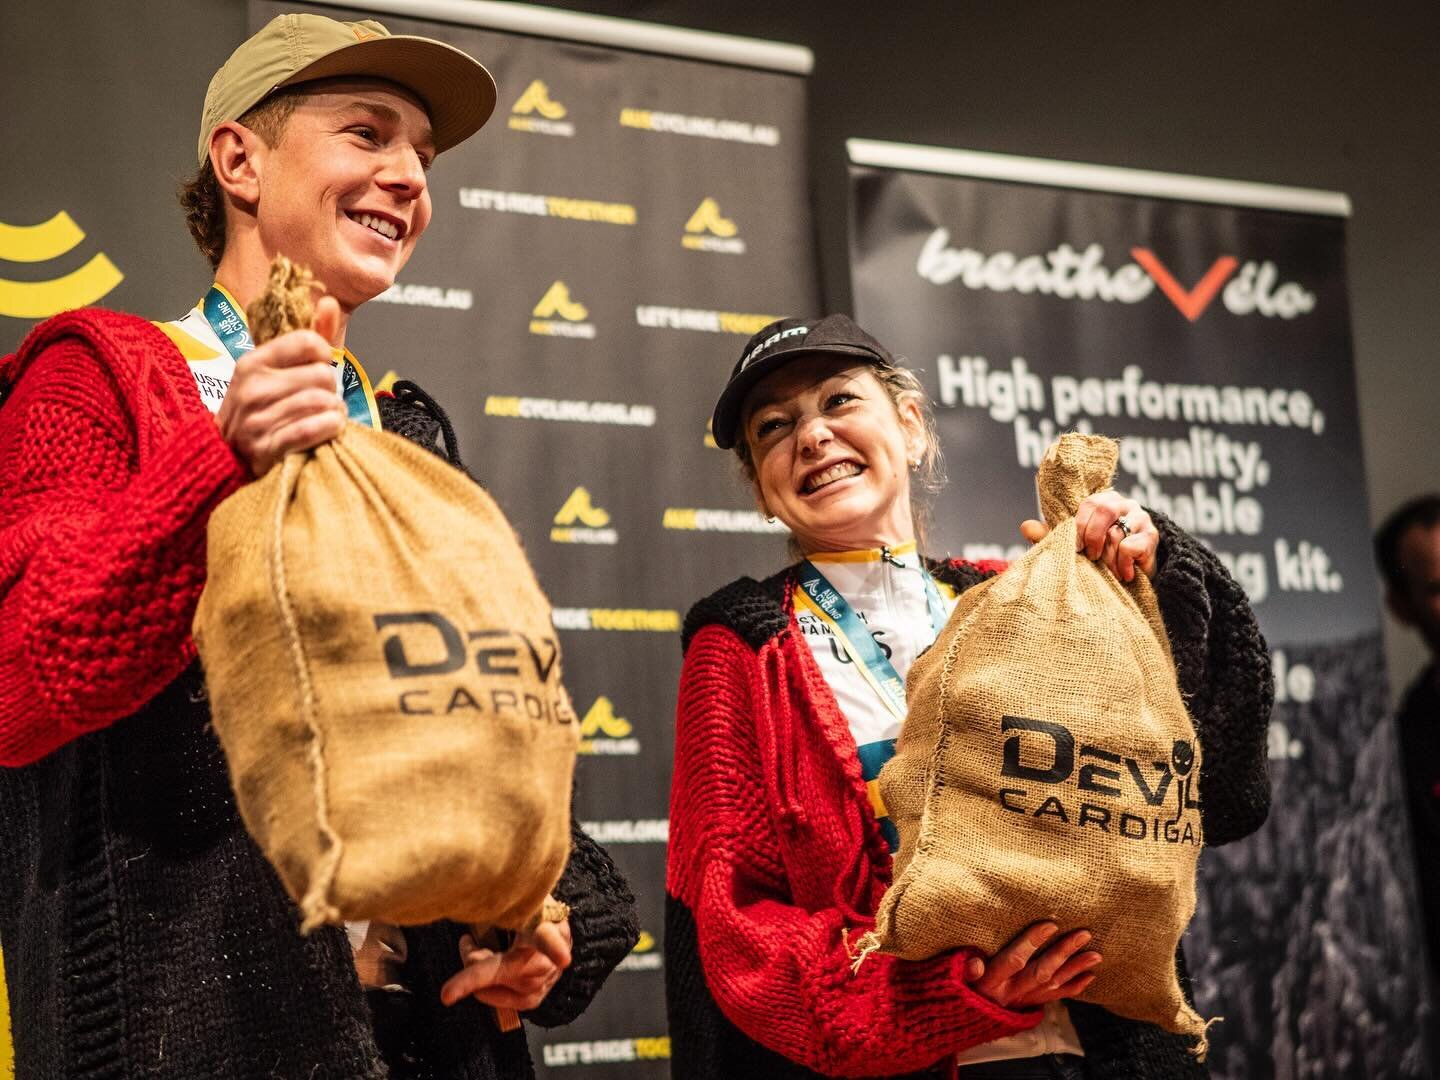 12 WEEKS TO GO

Just like that, the countdown is on. Your training starts now if you want a chance to win the bag of potatoes!

Will our champions @justinelbarrow and @connor.sens return to Derby in 2024 to defend their Cardigans?

Or will a new cham